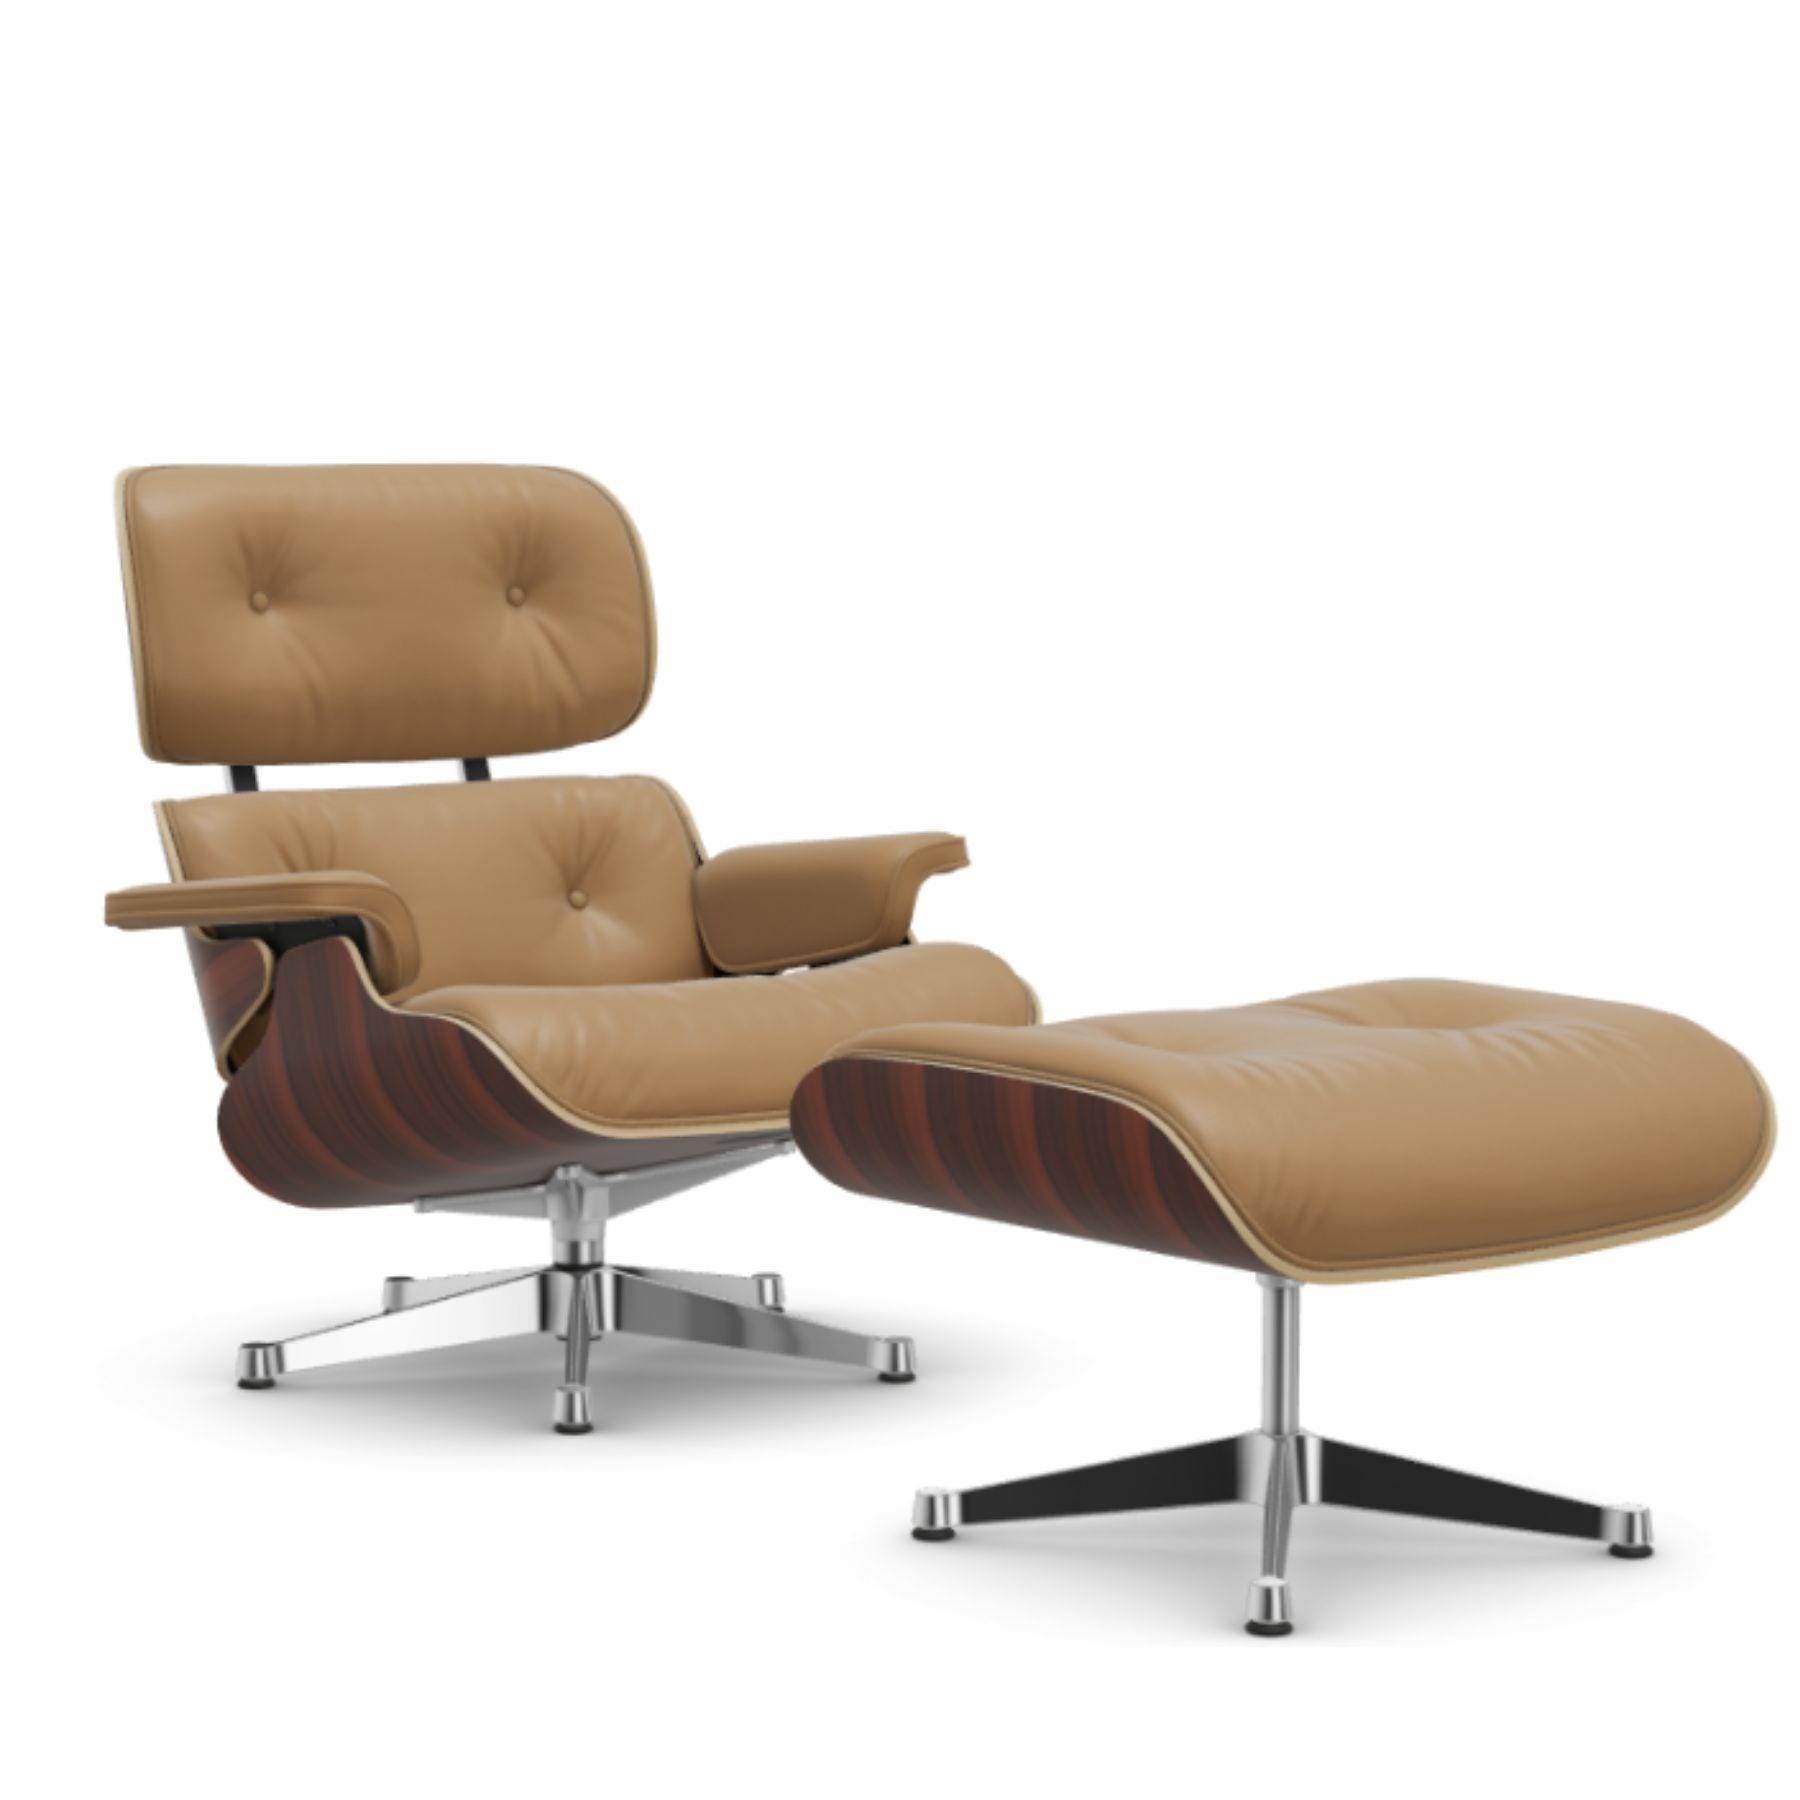 Vitra Eames Classic Lounge Chair Santos Palisander Leather Natural F Caramel Polished Aluminium With Ottoman Light Wood Designer Furniture From Ho